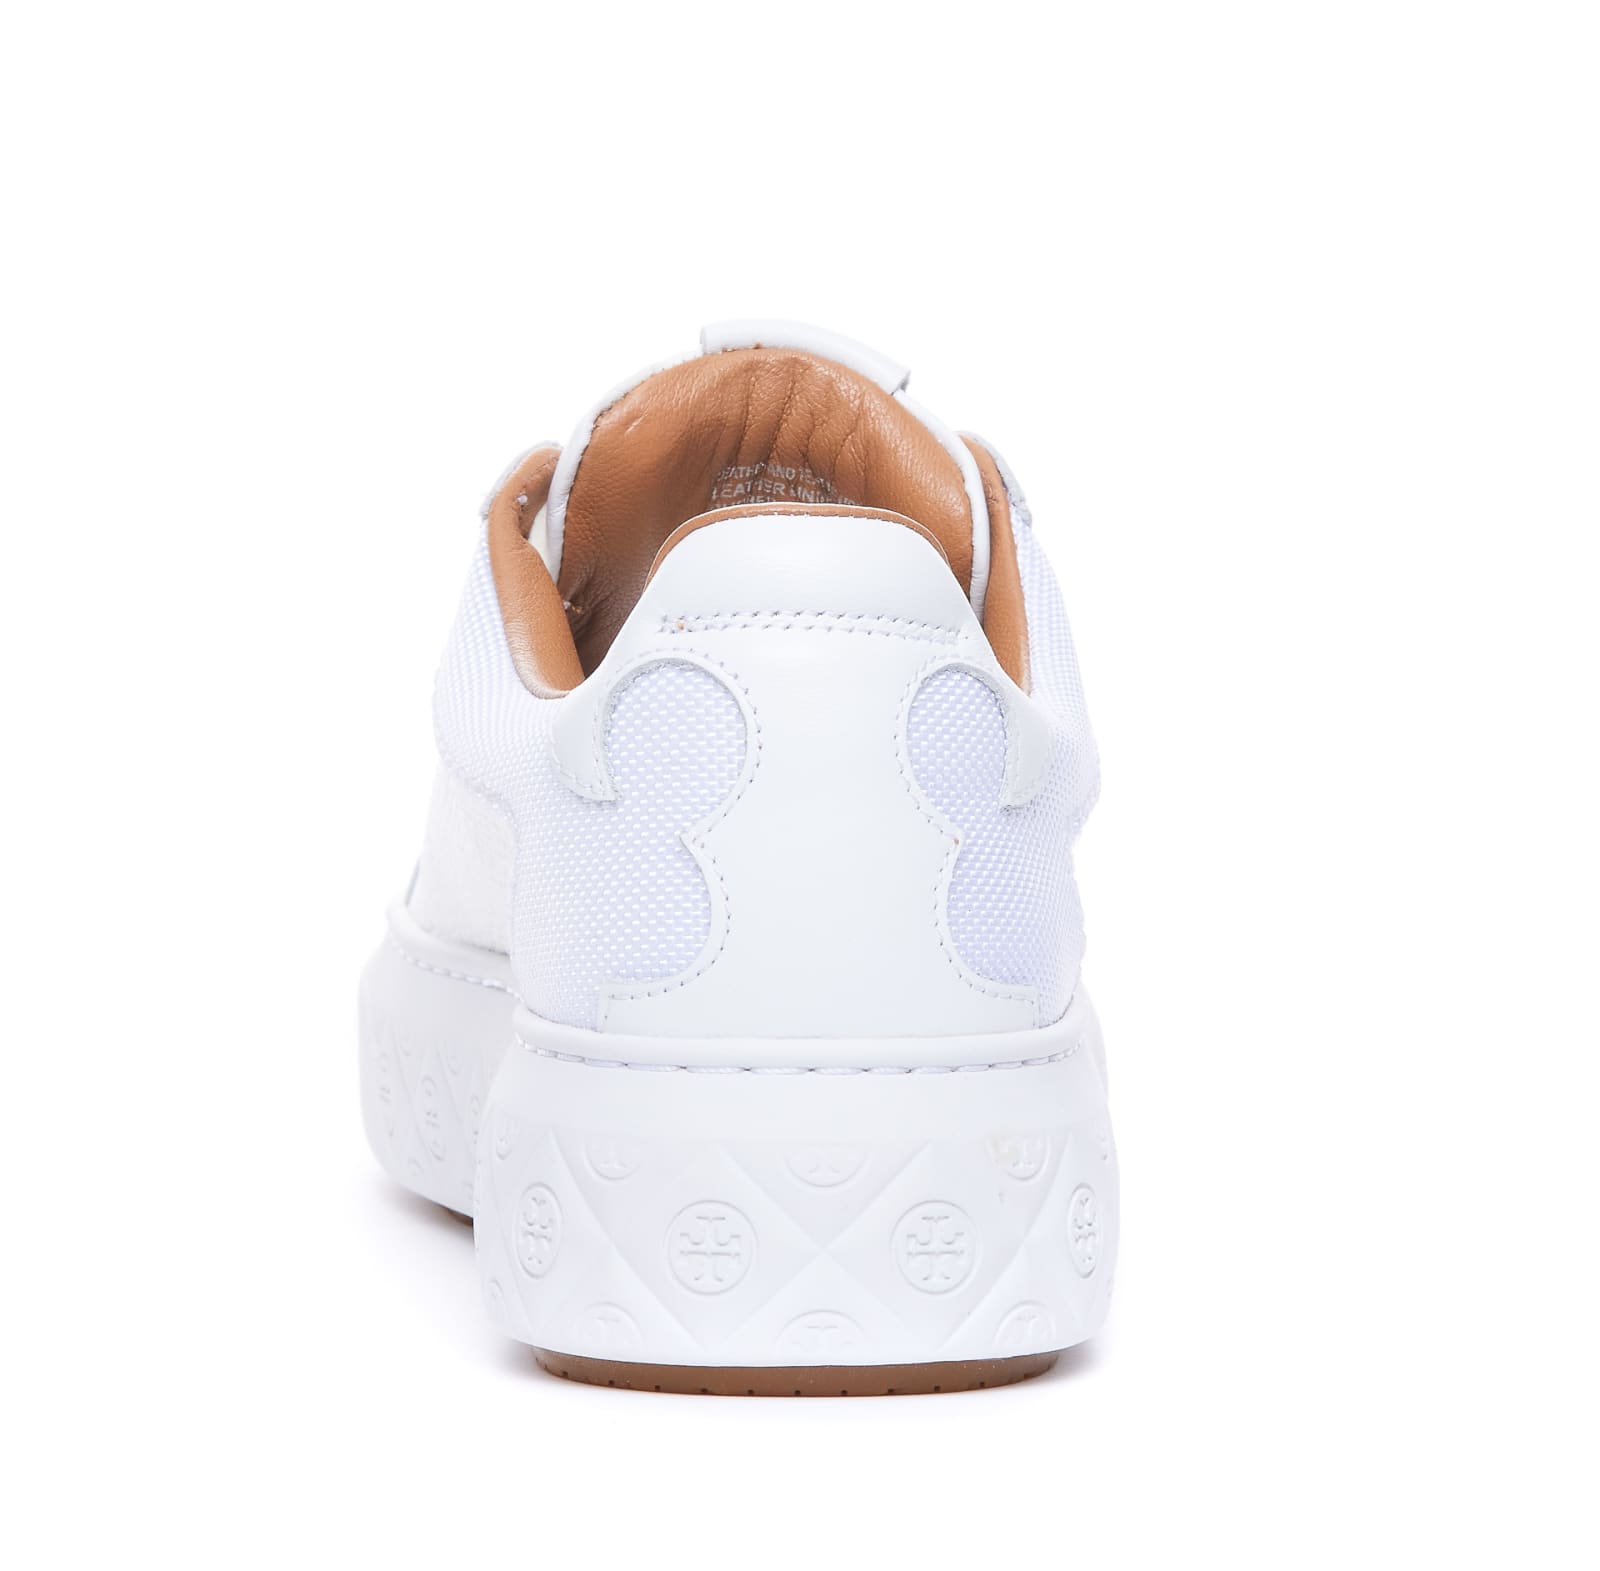 Shop Tory Burch Ladybug Sneakers In White